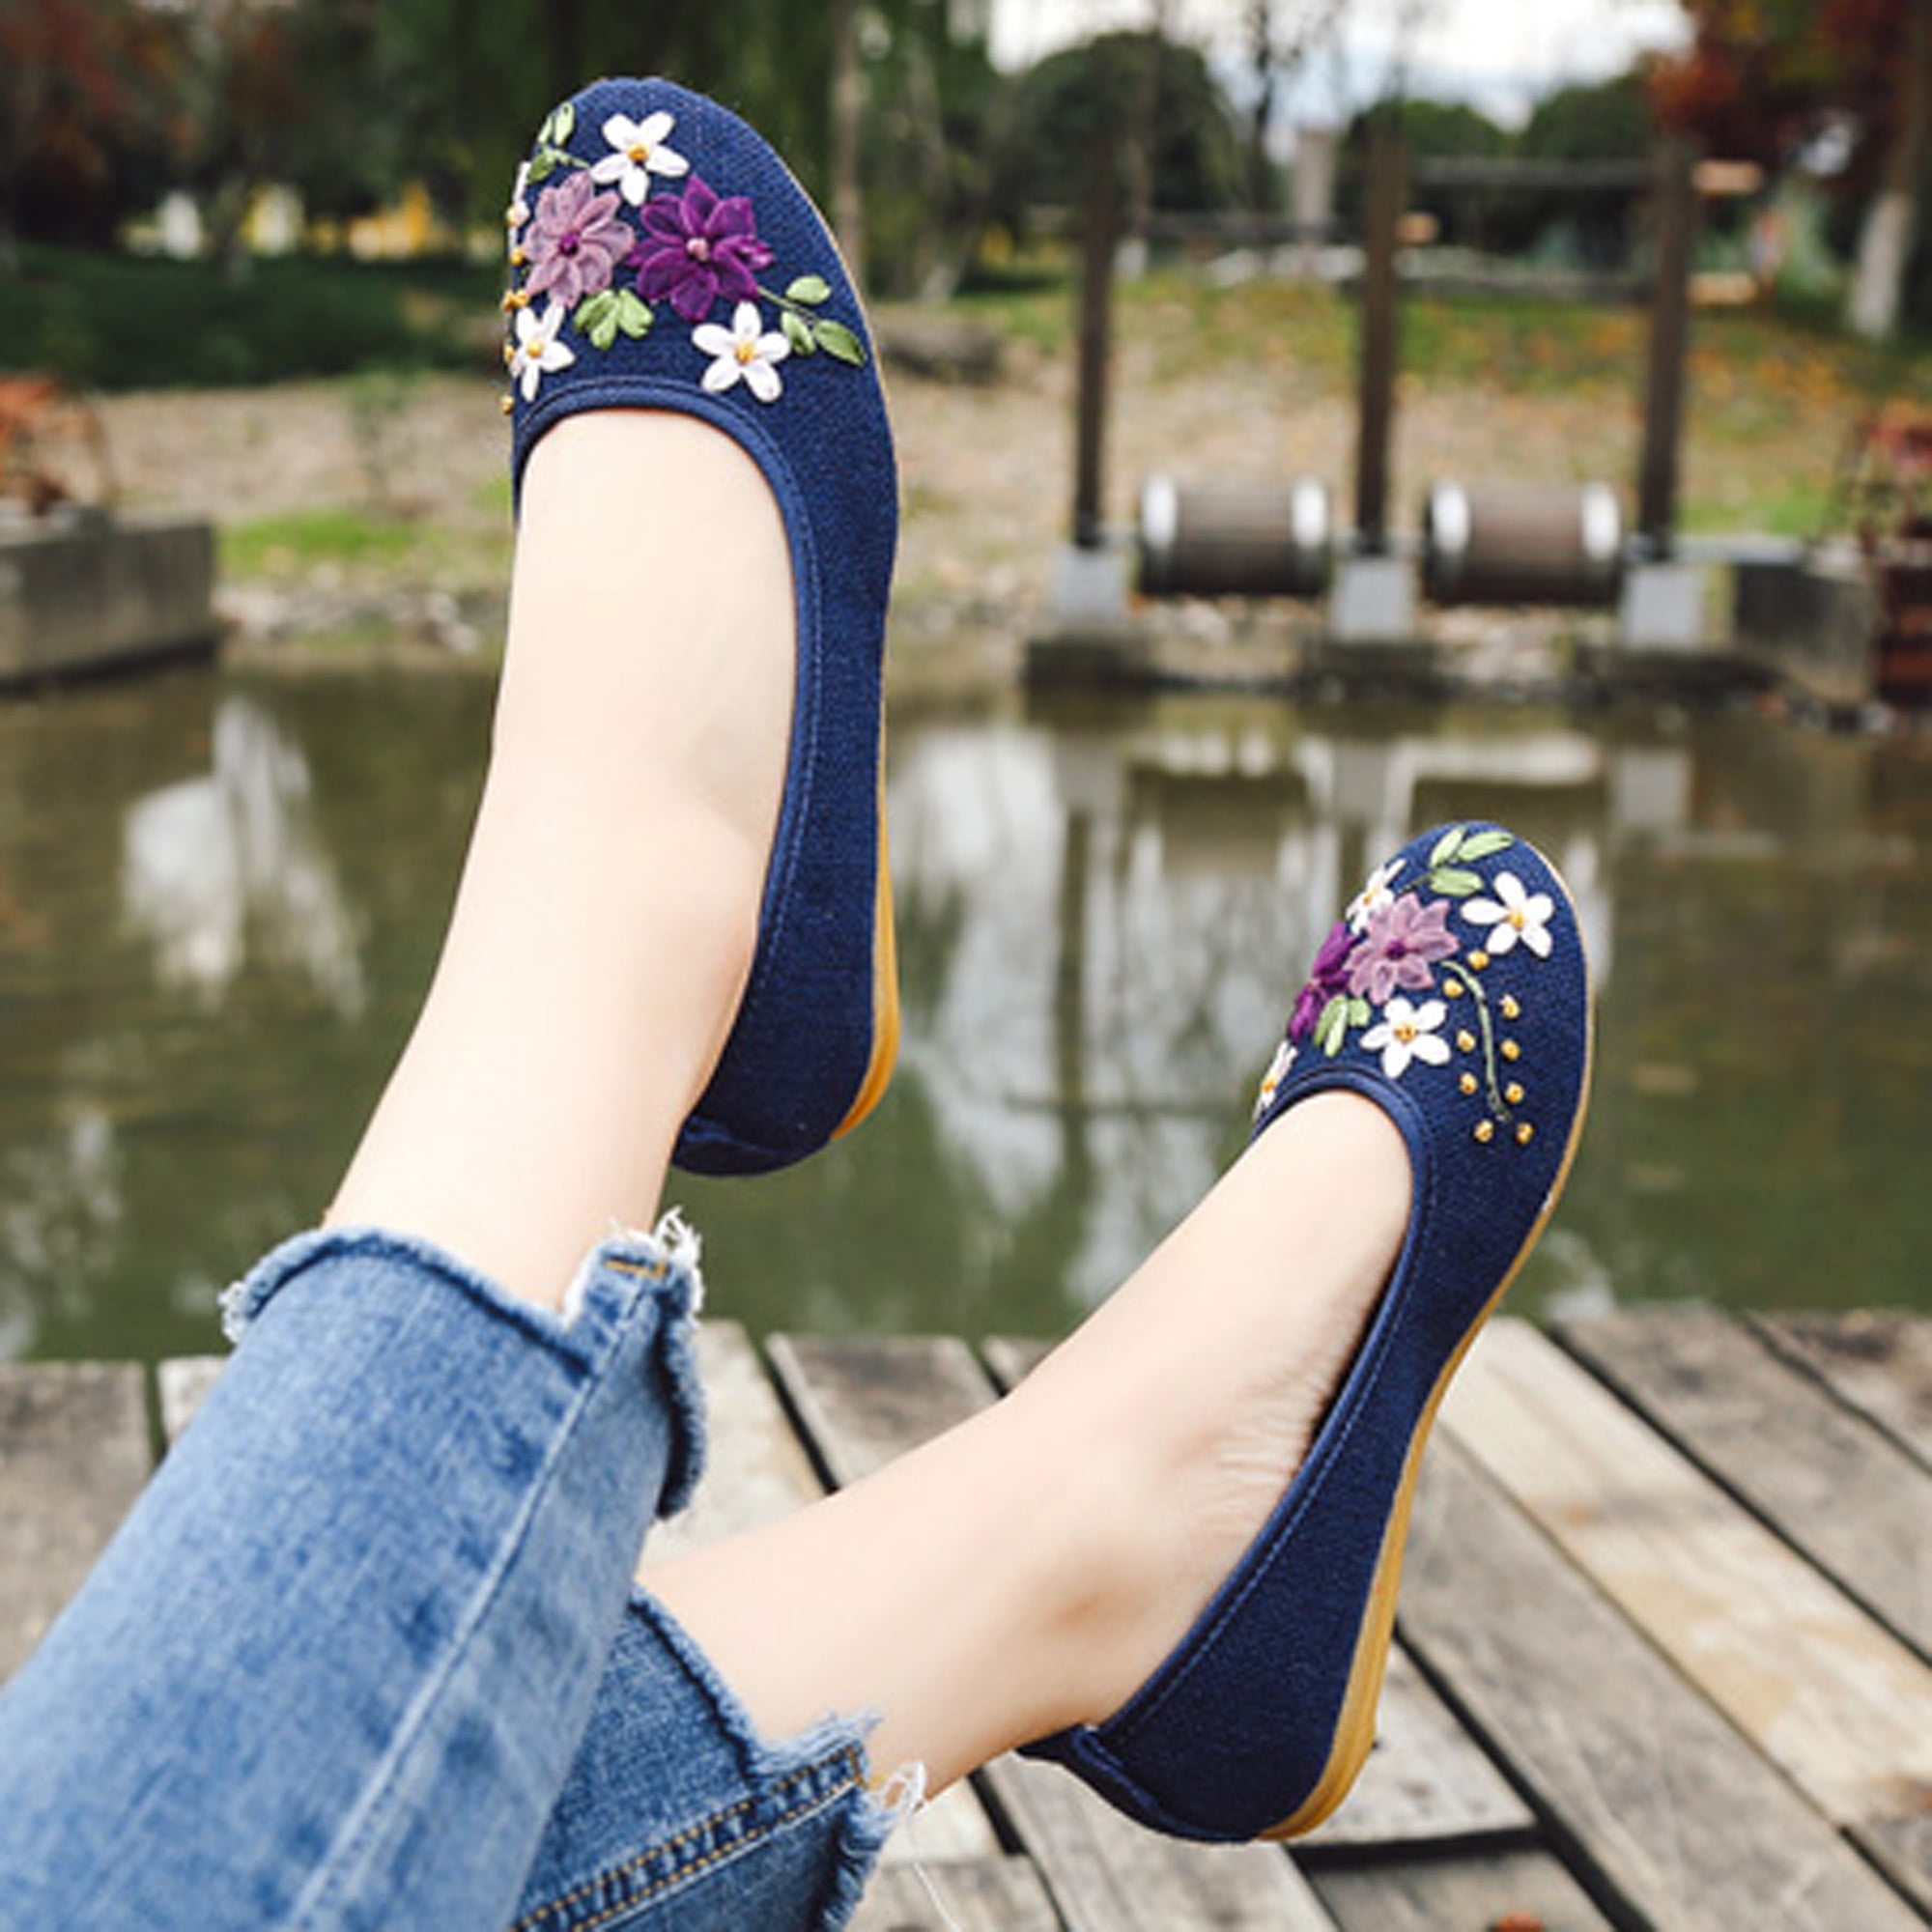 Women Fashion Flat Shoes Round Toe Handmade Floral Comfortable Slip On Casual Faux Leather Loafers